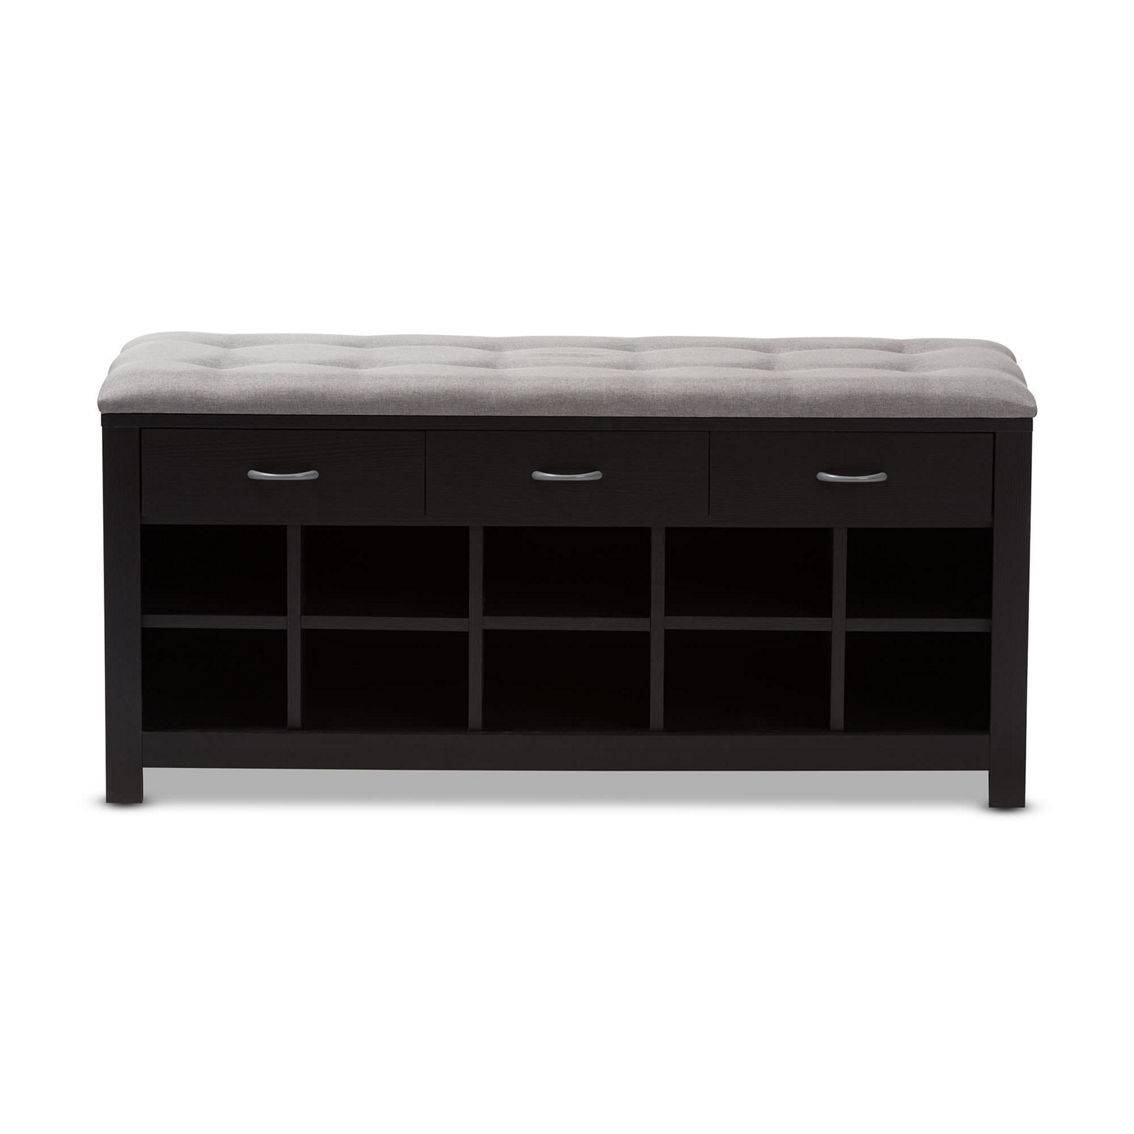 Baxton Studio Espresso Finished Grey Fabric Upholstered Cushioned Entryway Bench - Image 3 of 5